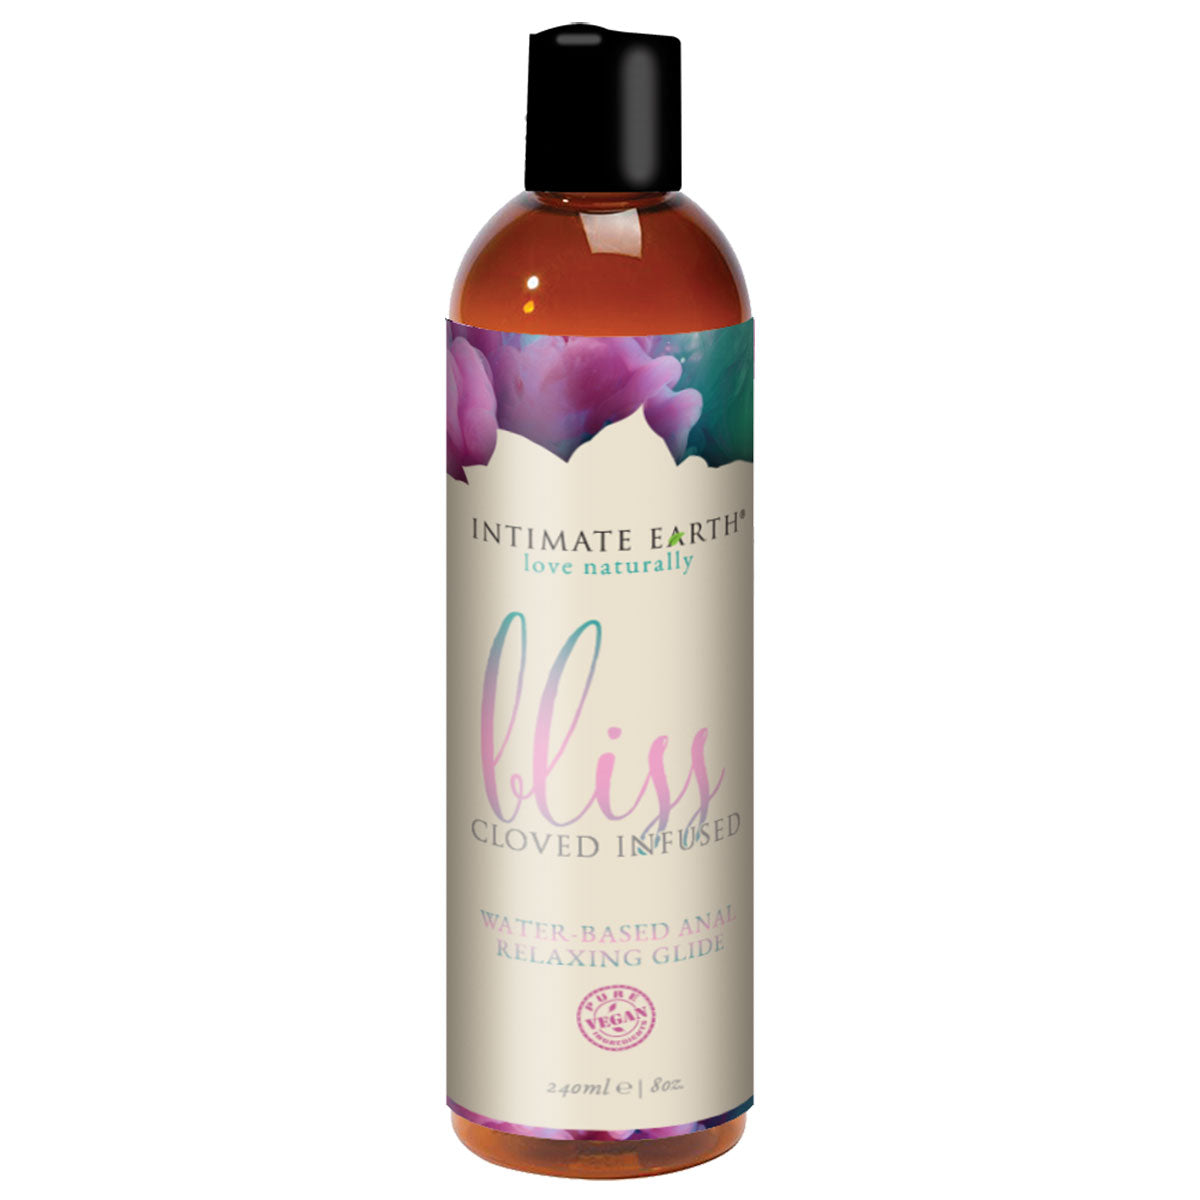 Intimate Earth Bliss Water-Based Anal Relaxing Glide 8oz